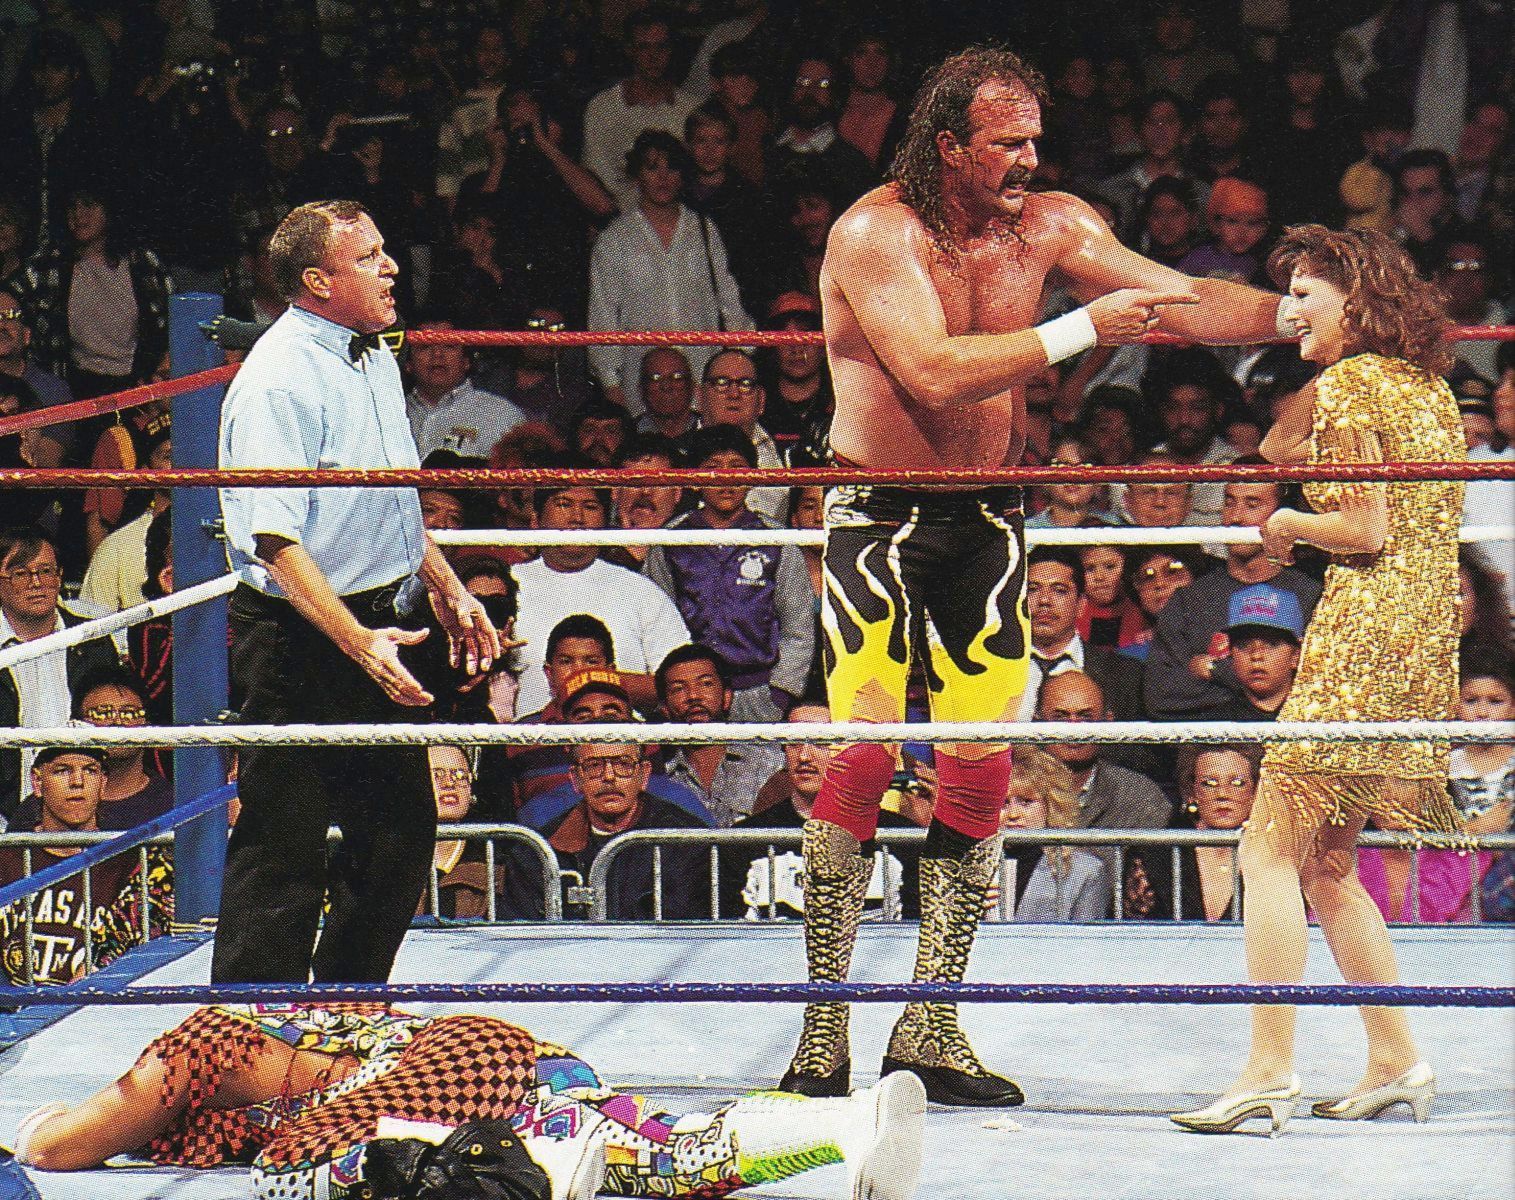 WWF Wrestling on X: "🎥 Federation Flashback! A reinstated Randy Savage and  a sinister Jake "The Snake Roberts collide at the much hyped "This Tuesday  in Texas" PPV in December of 1991.